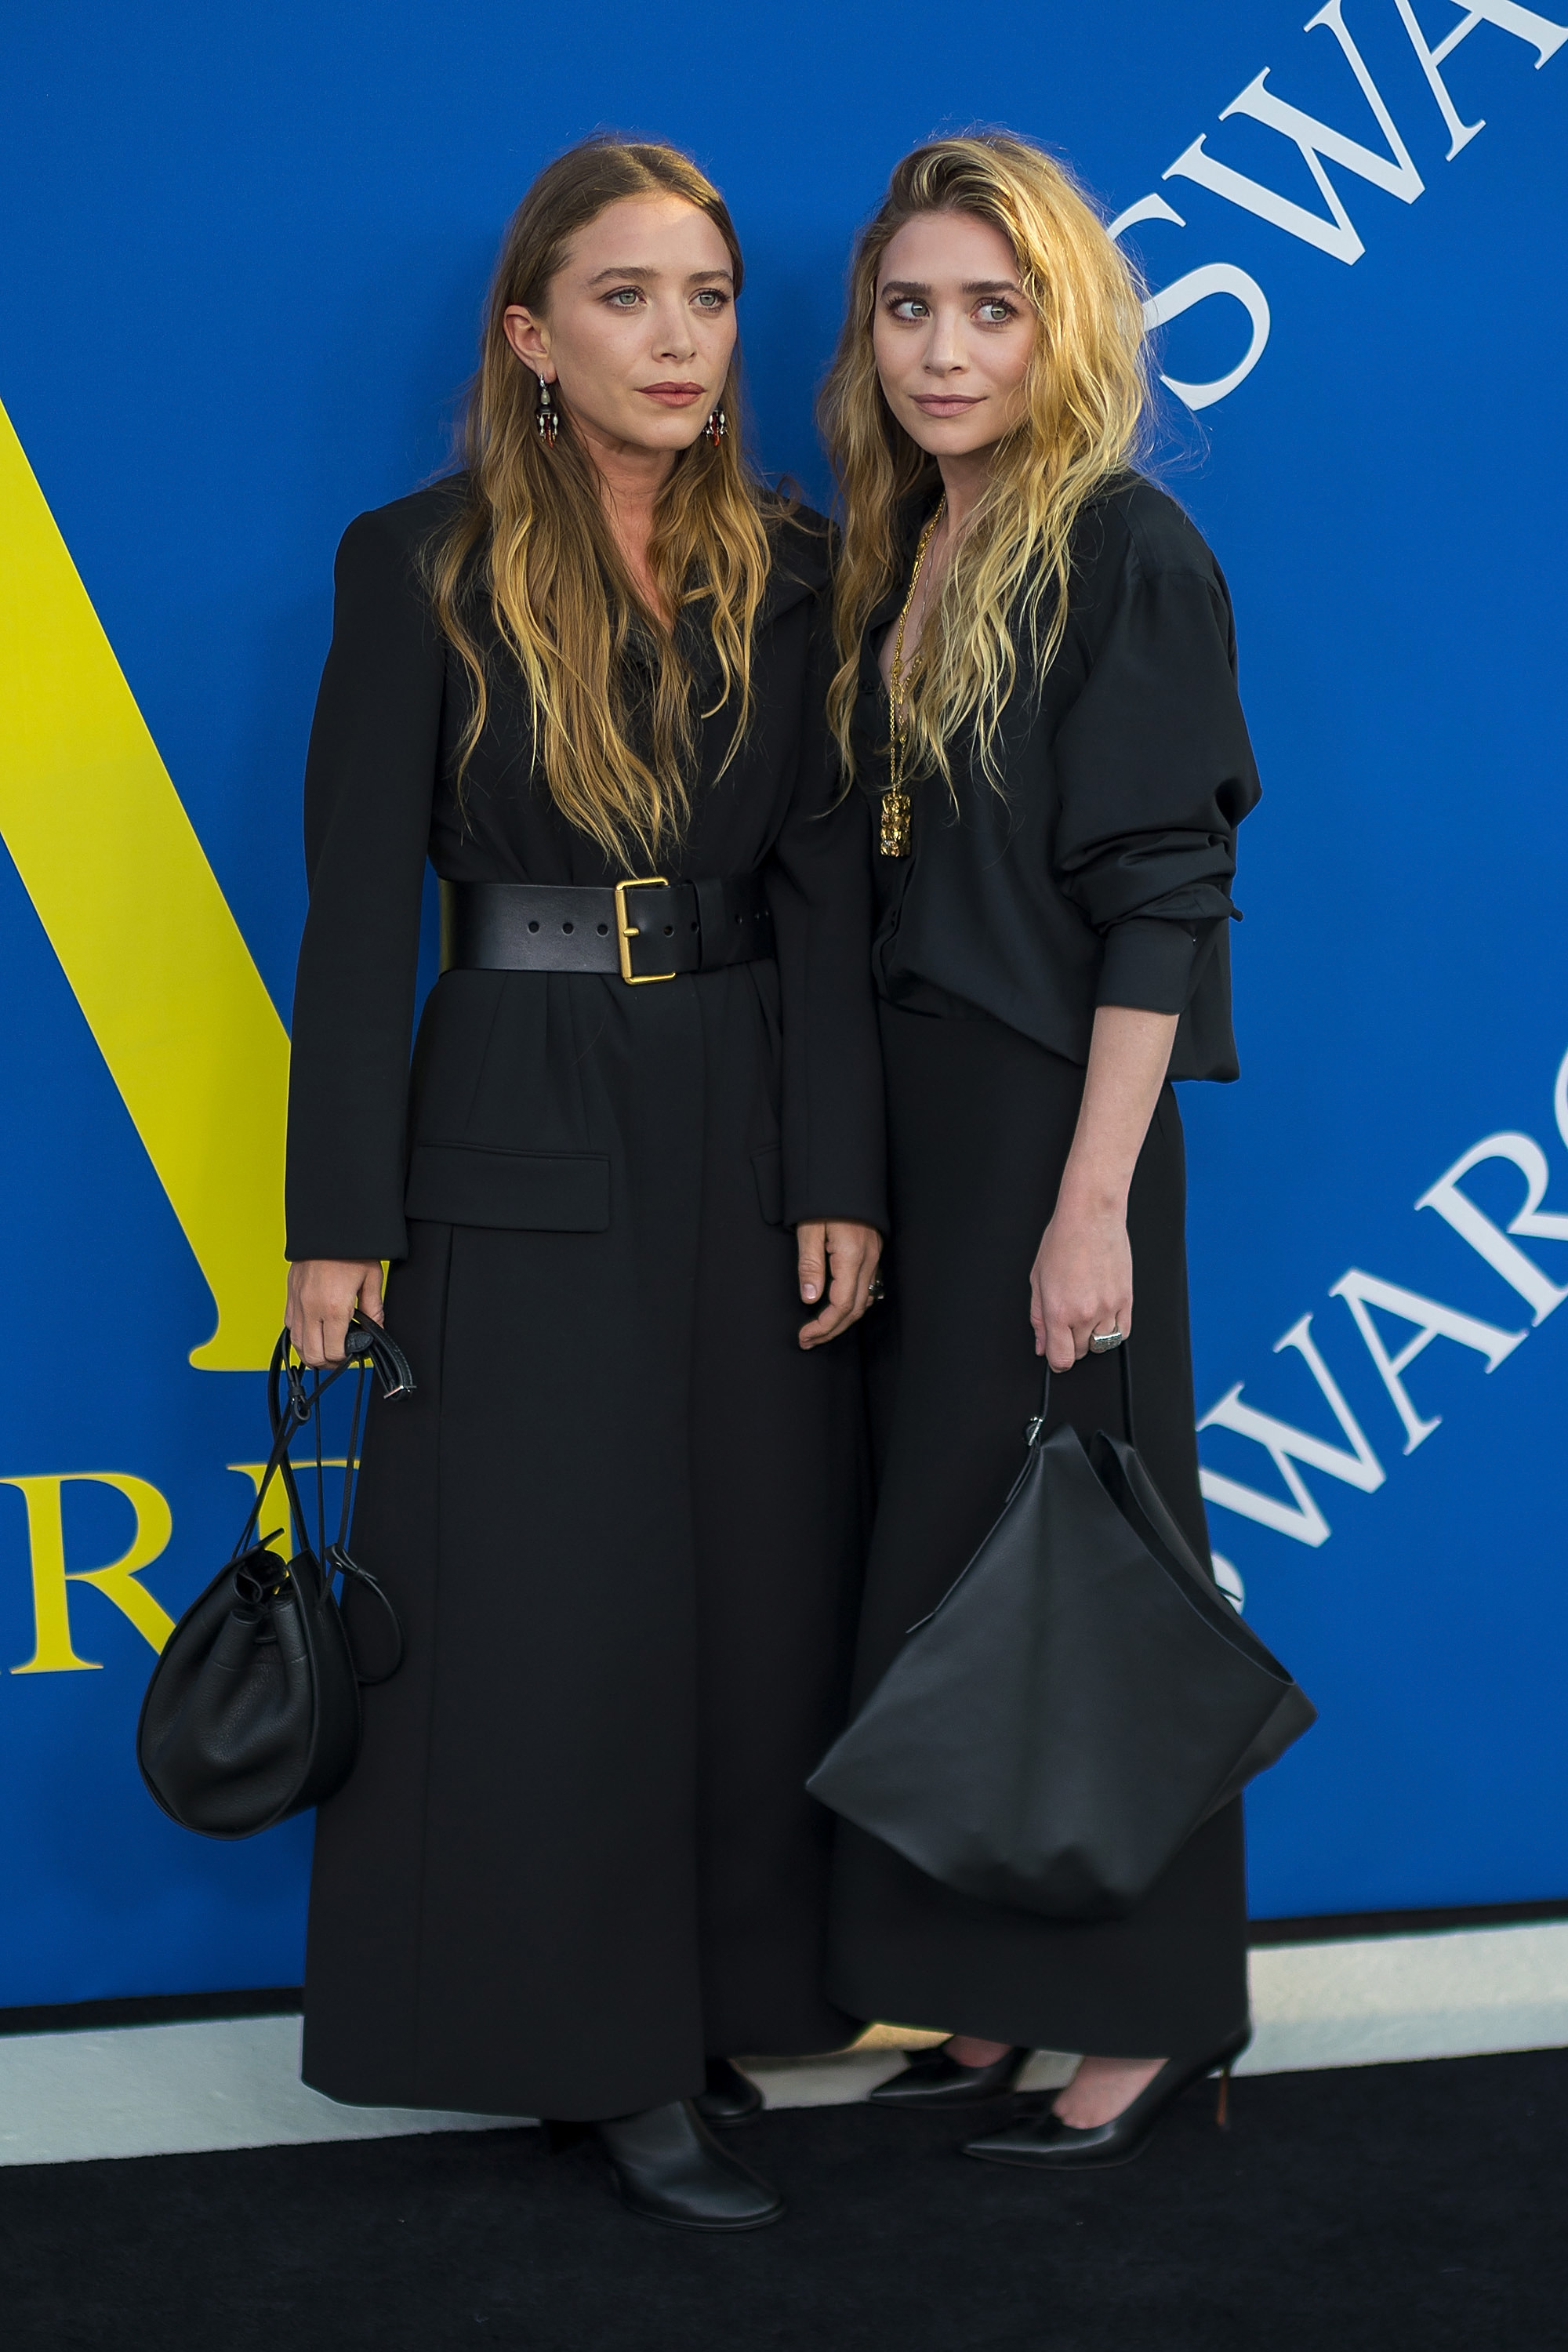 Mary-Kate Olsen and Ashley Olsen arrive at the 2018 CFDA Fashion Awards on June 4, 2018